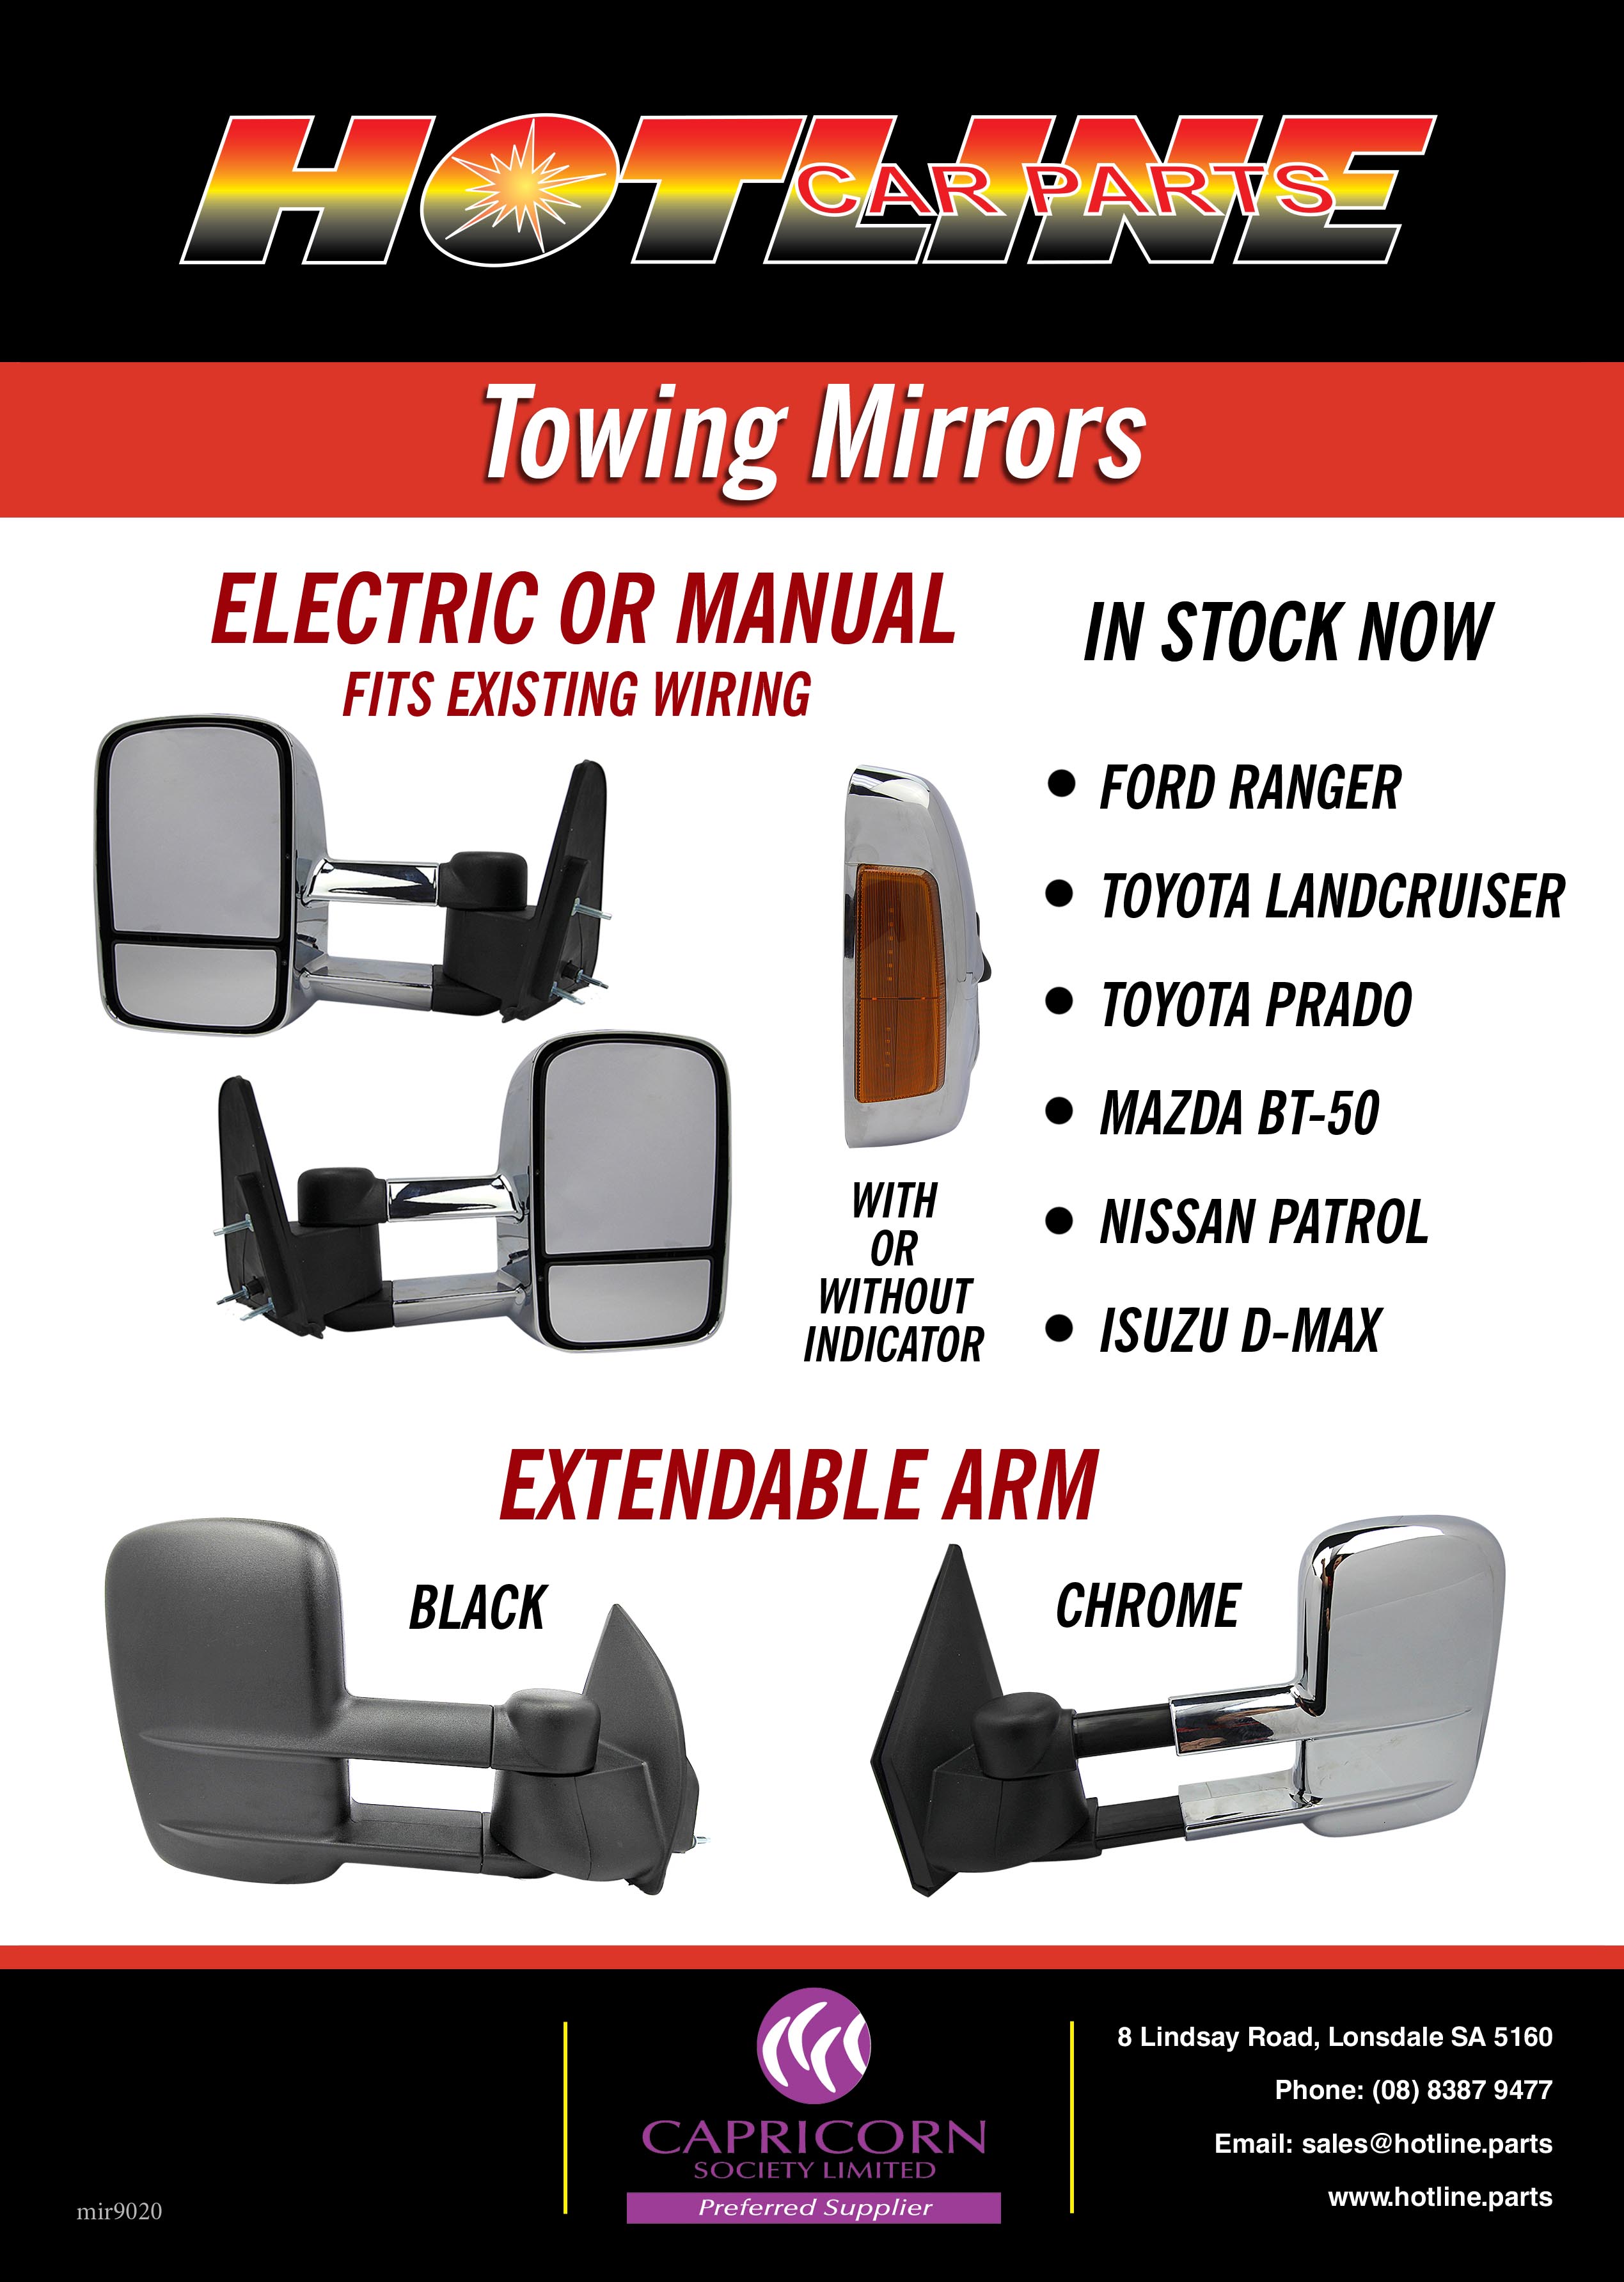 towing mirrors in stock now